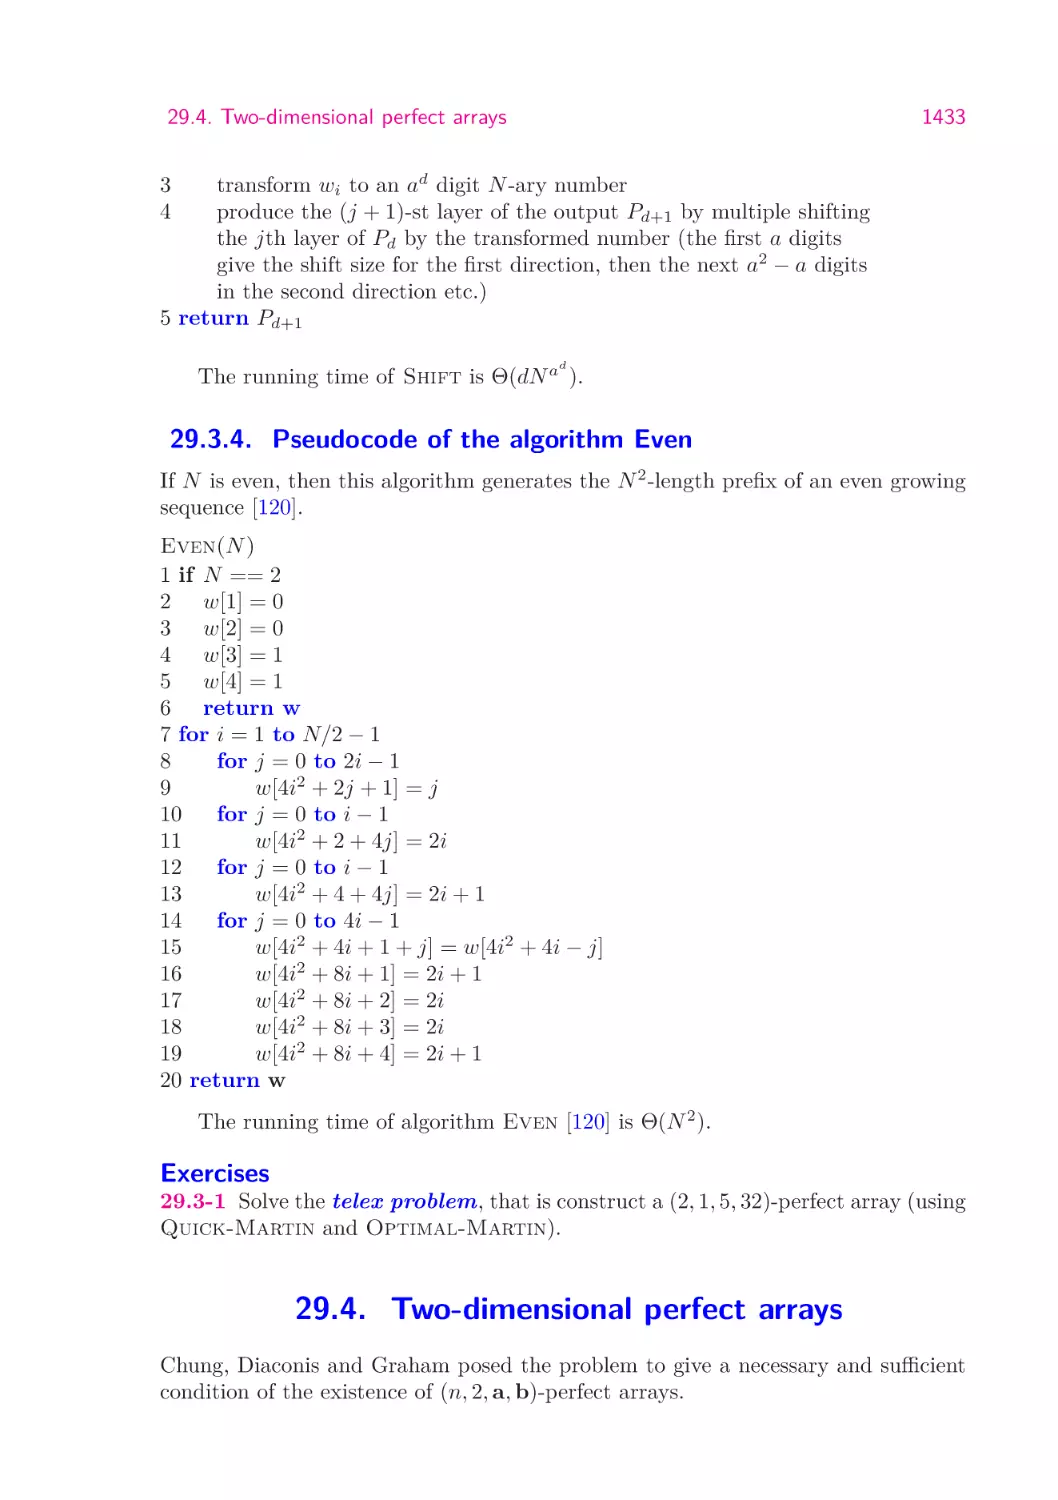 29.3.4.  Pseudocode of the algorithm Even
29.4.  Two-dimensional perfect arrays